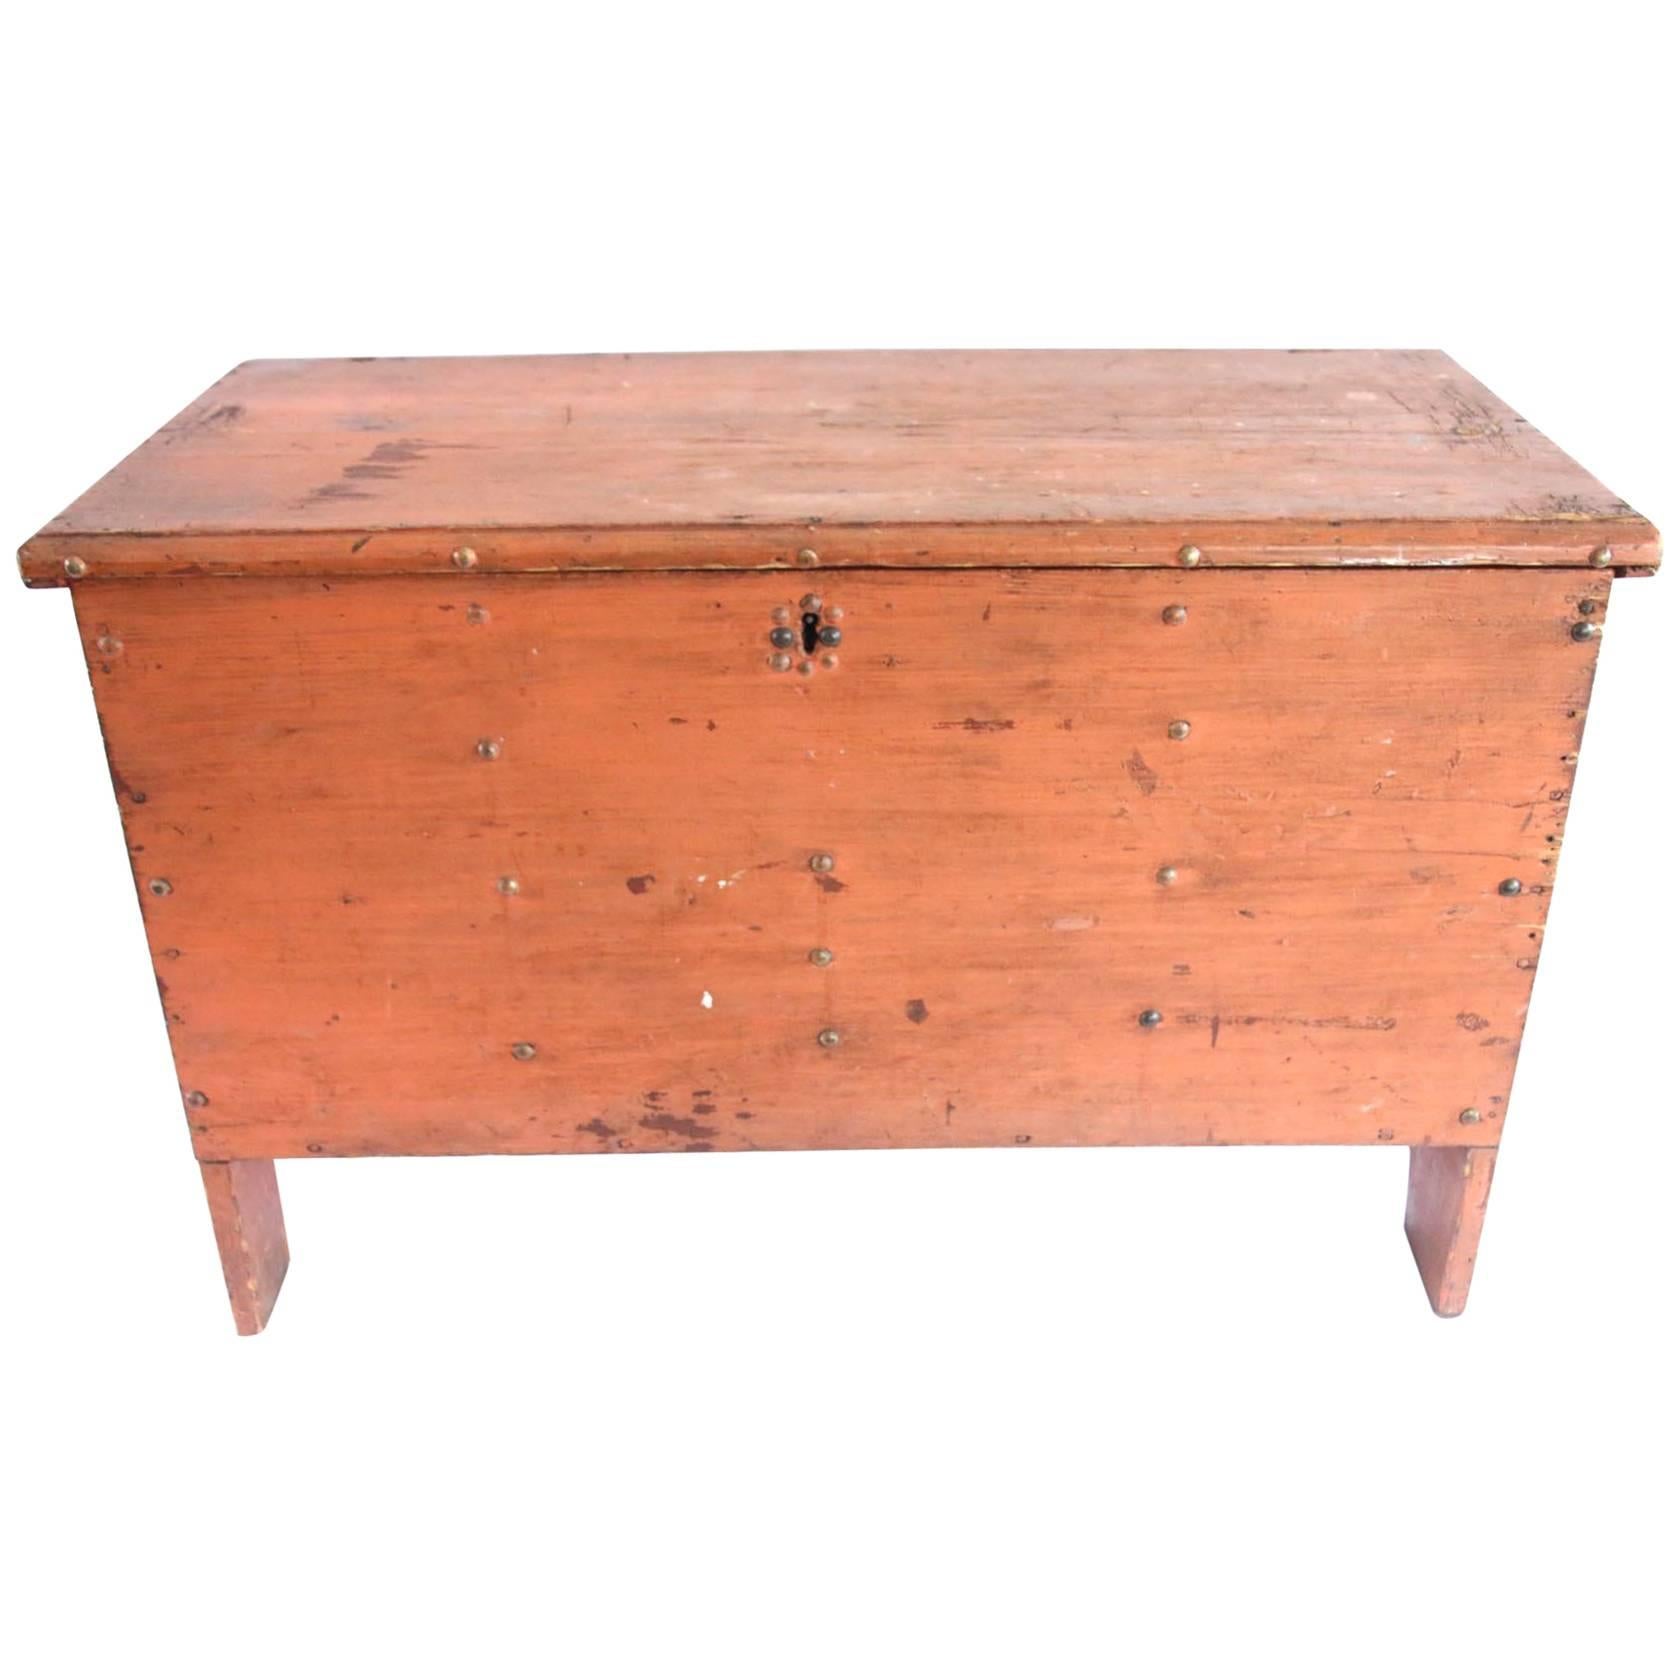 Early 19th Century Child's Painted Blanket Chest For Sale